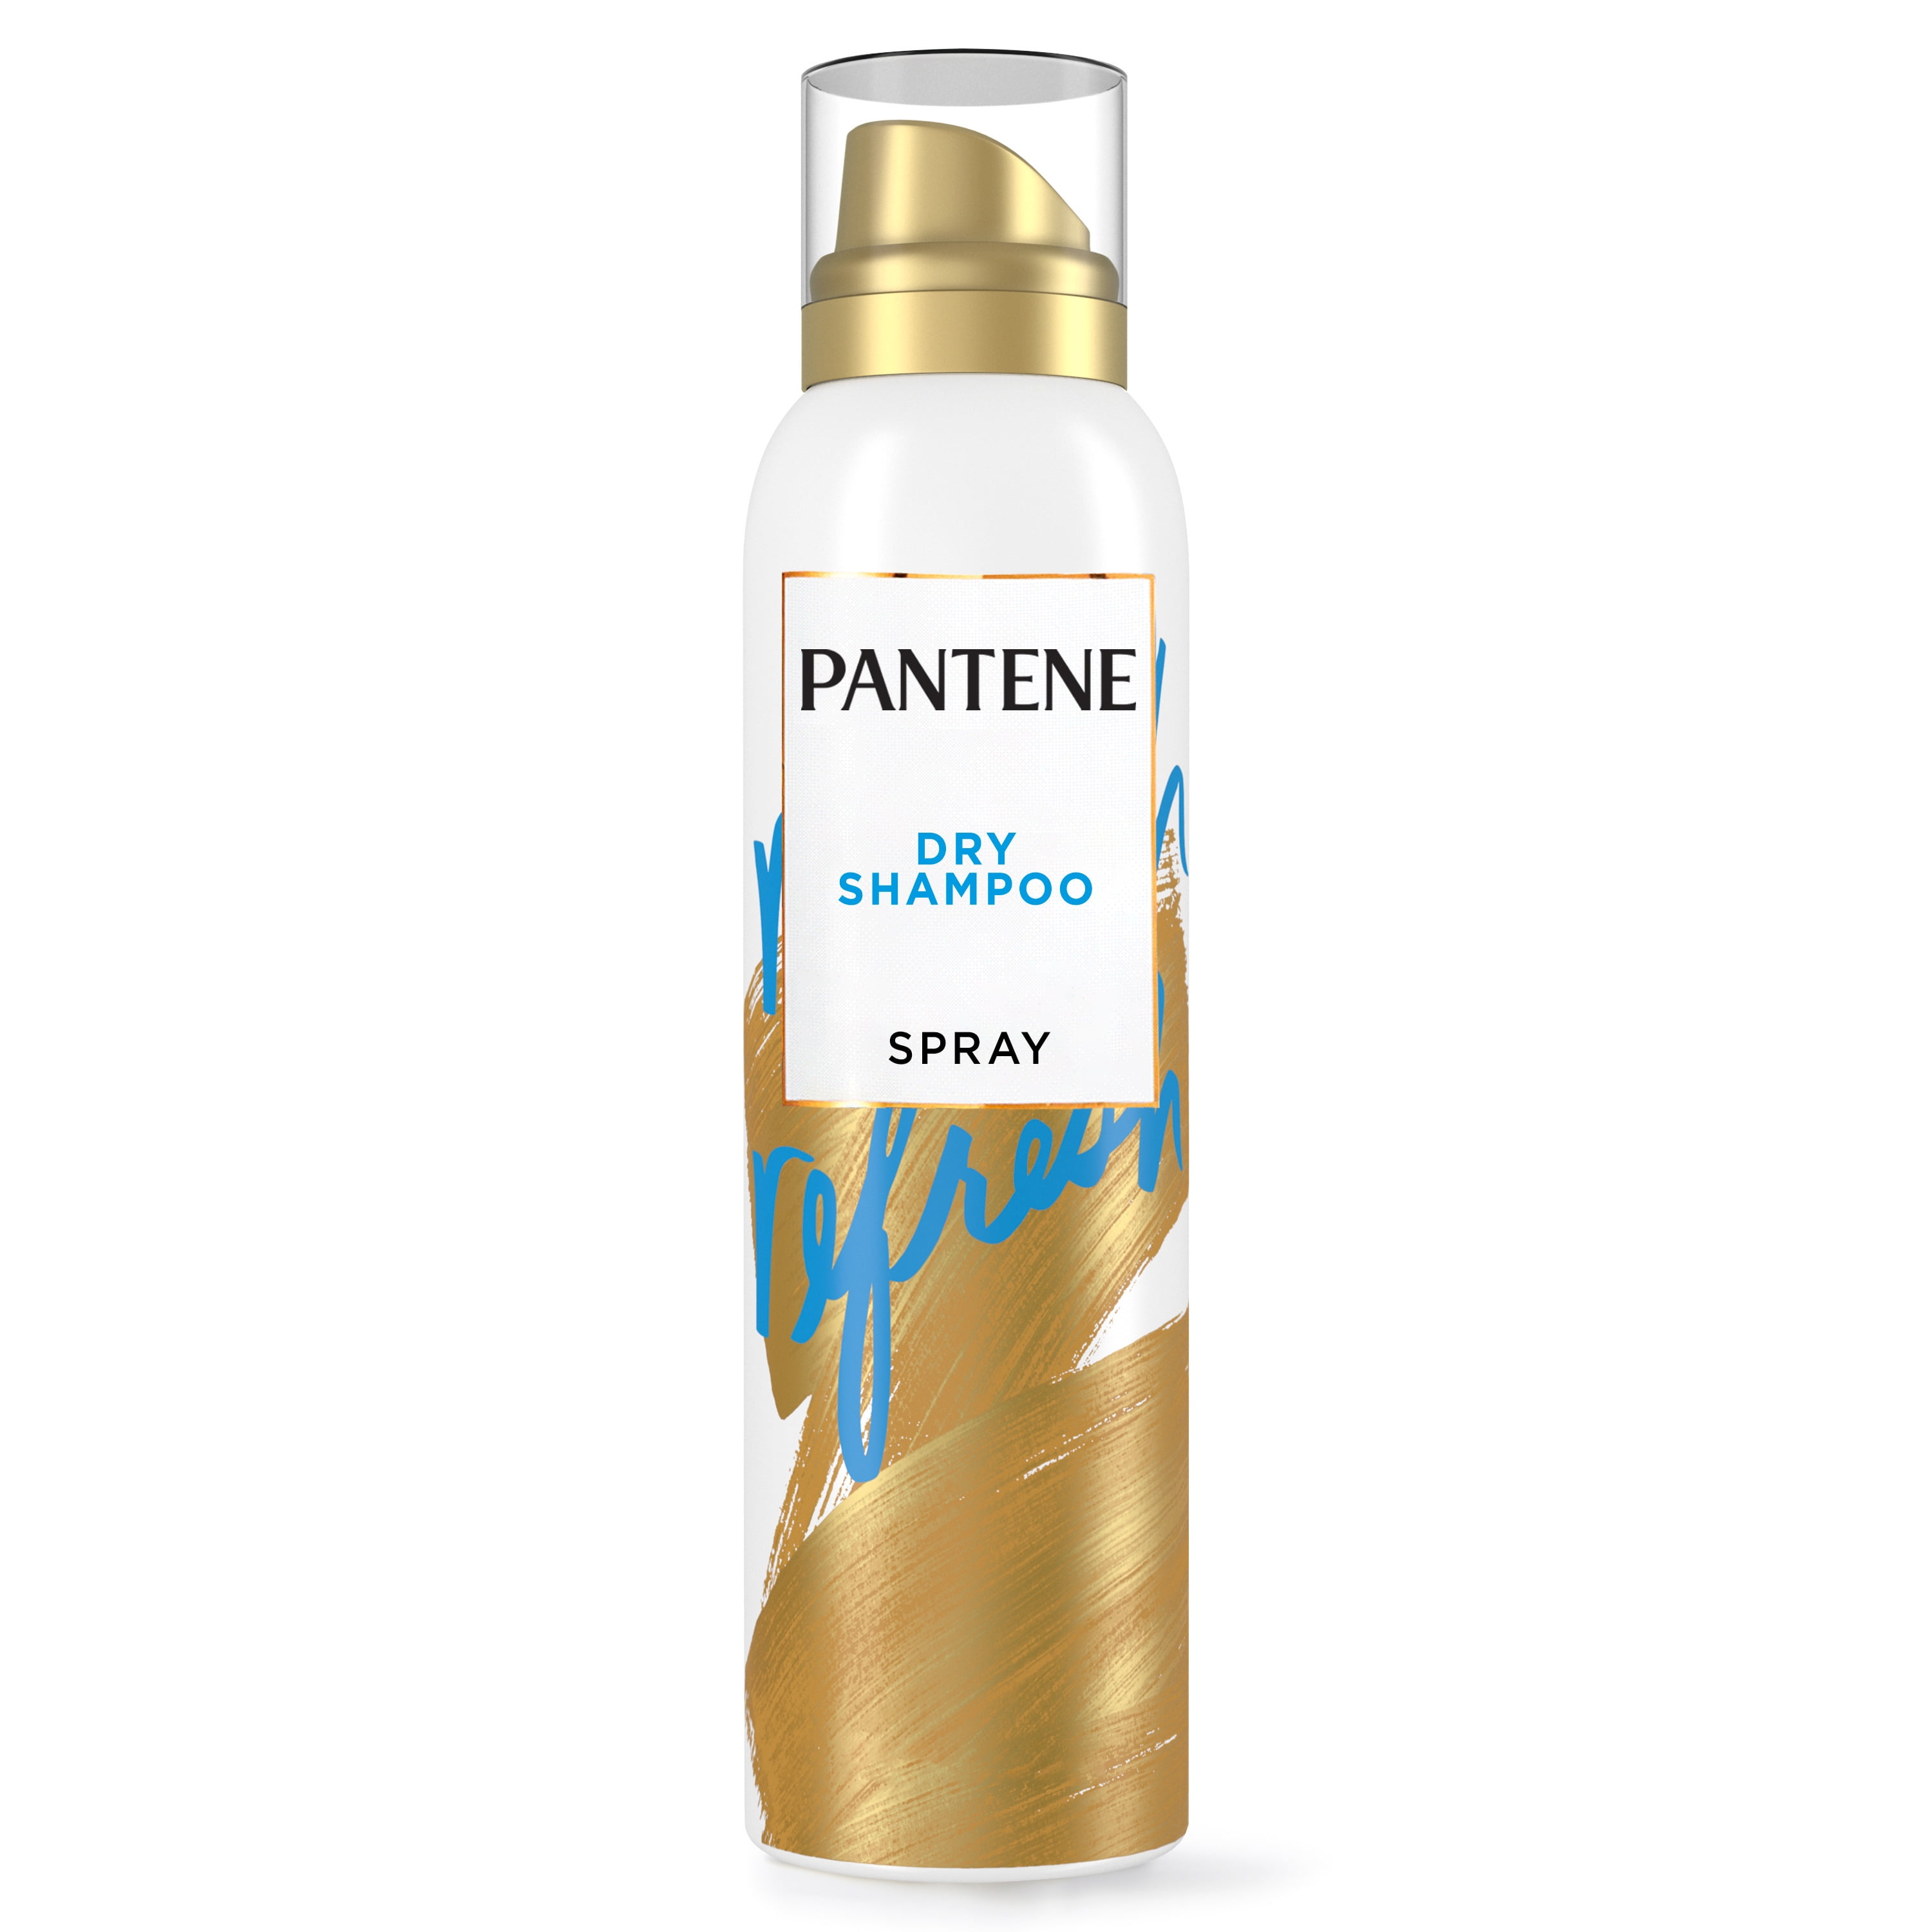 Pantene Dry Shampoo Spray, Volumizing and Cleansing for Fine and Color Treated Hair, Pro-V Refresh, 4.2 oz